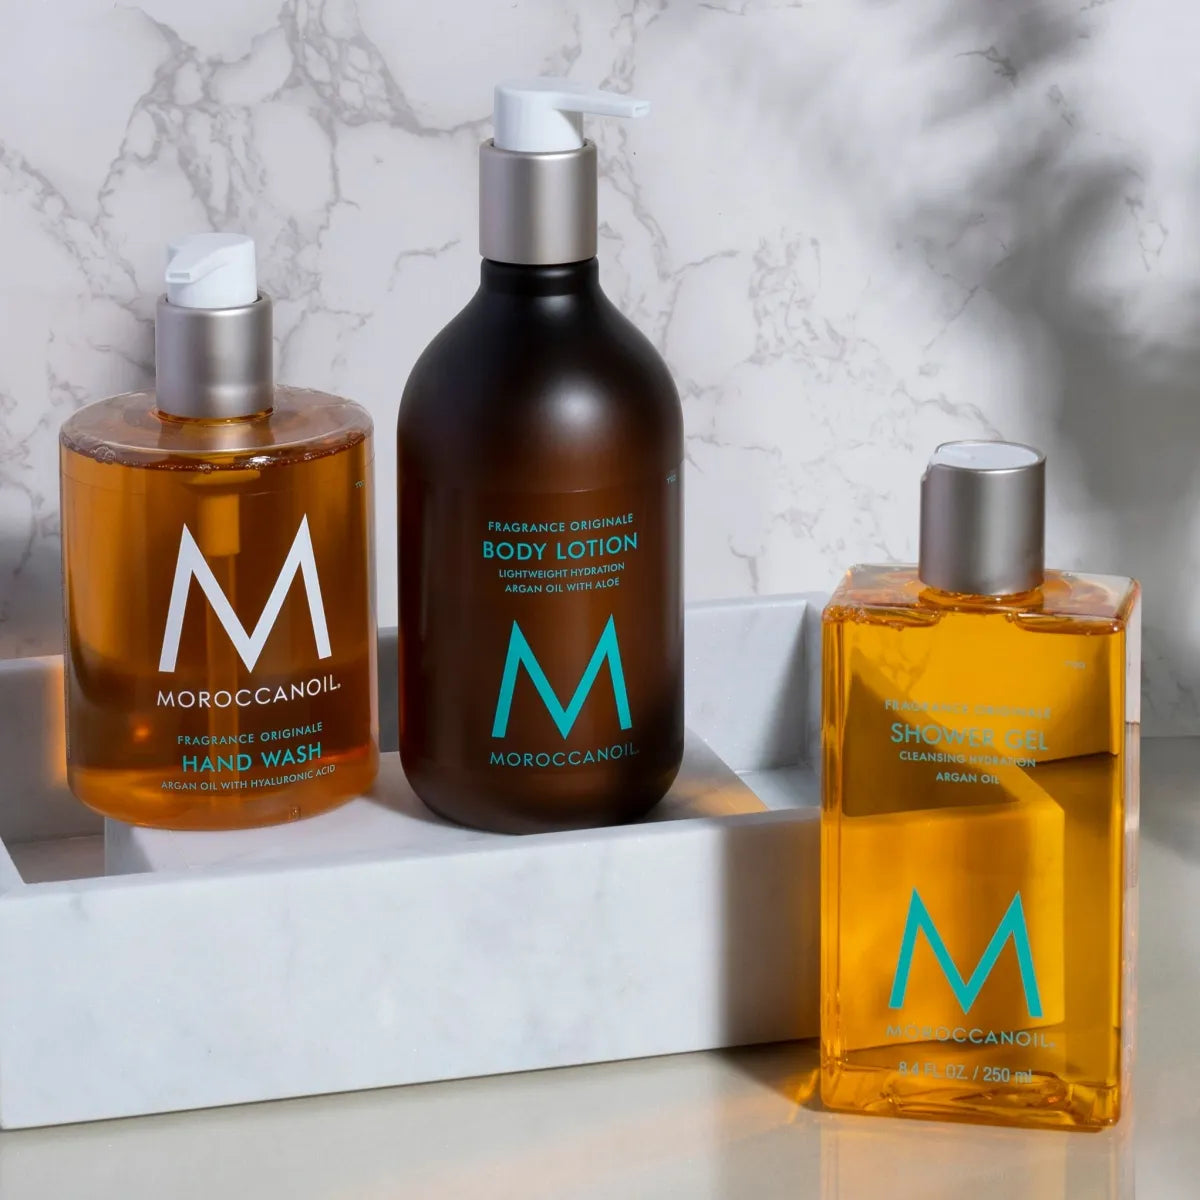 Moroccanoil body collection